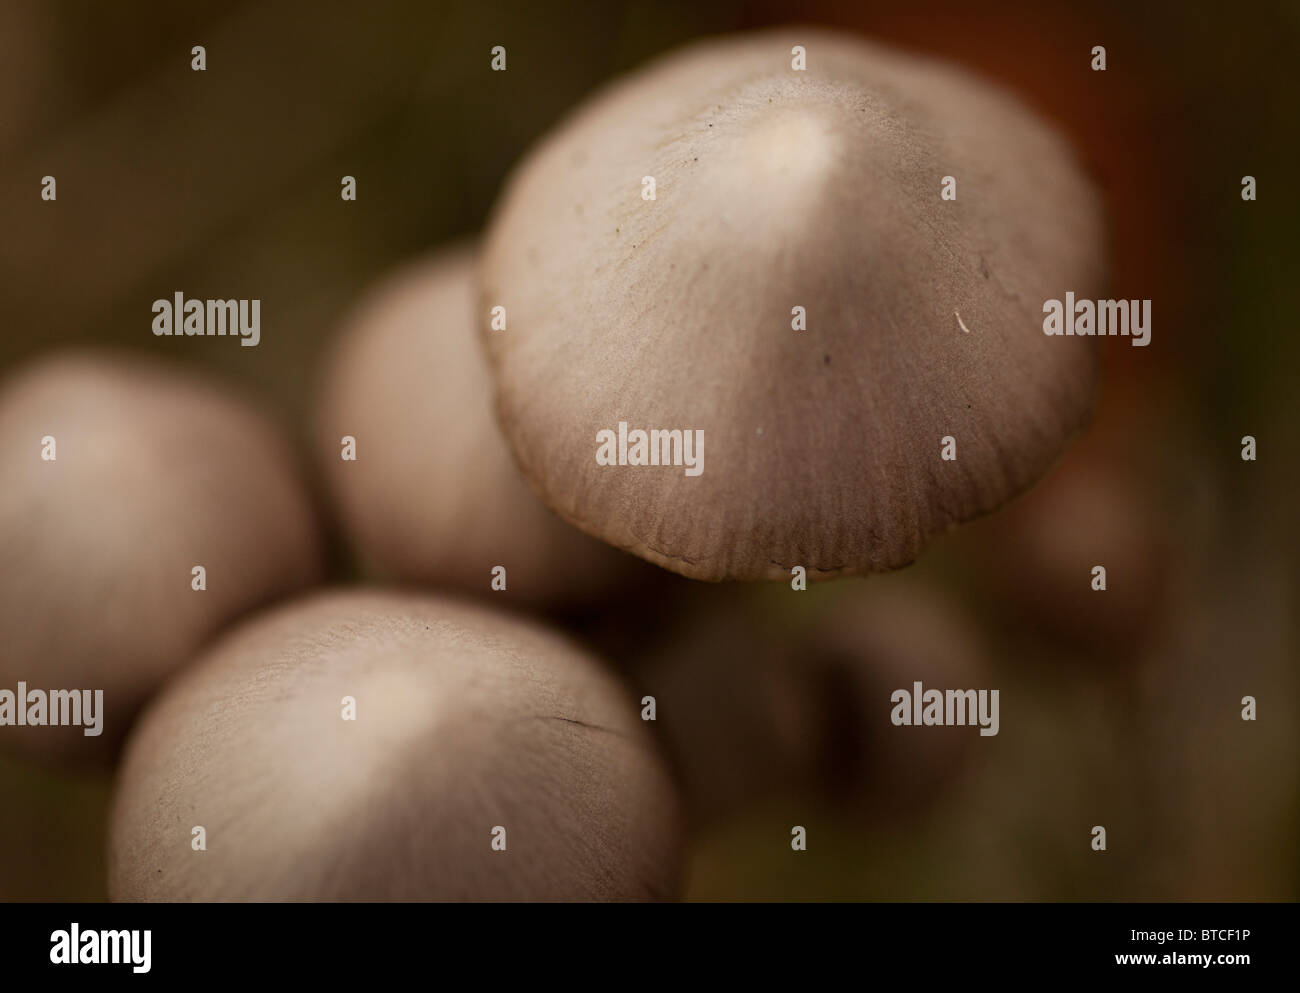 Creative image of brown caps of fungi taken with a shallow depth of field Stock Photo